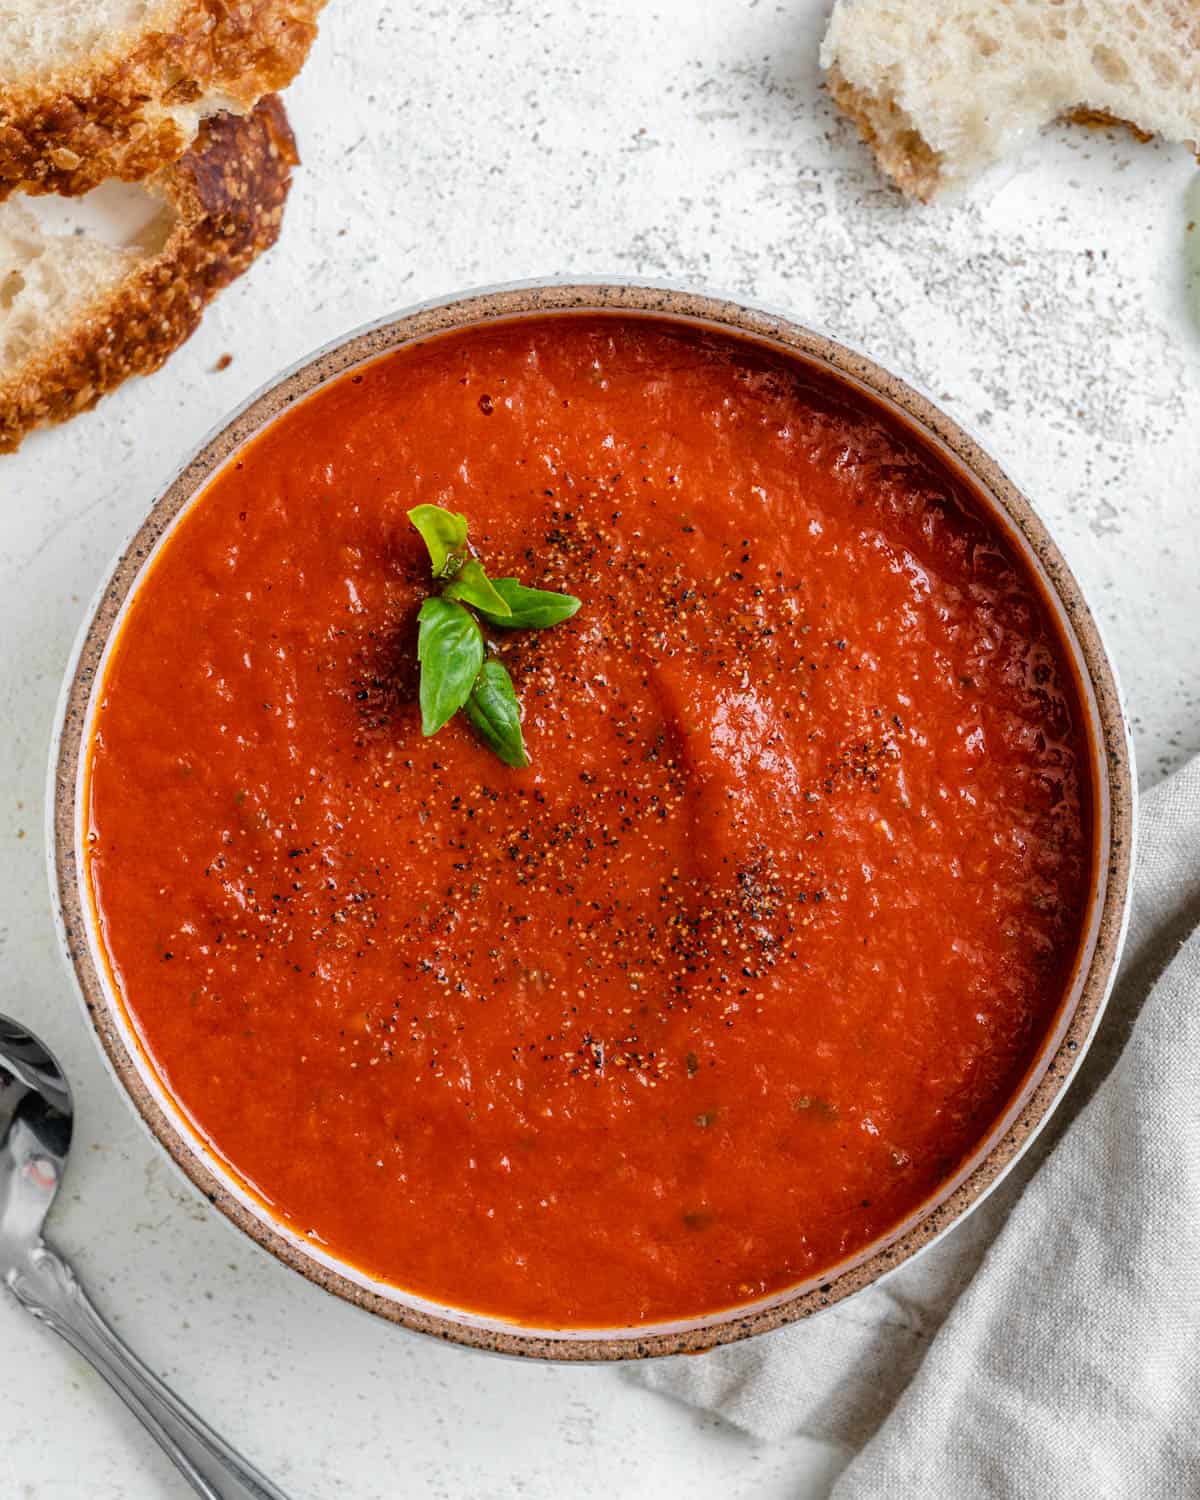 completed Quick Vegan Tomato Soup [With Canned Tomatoes] against a light background